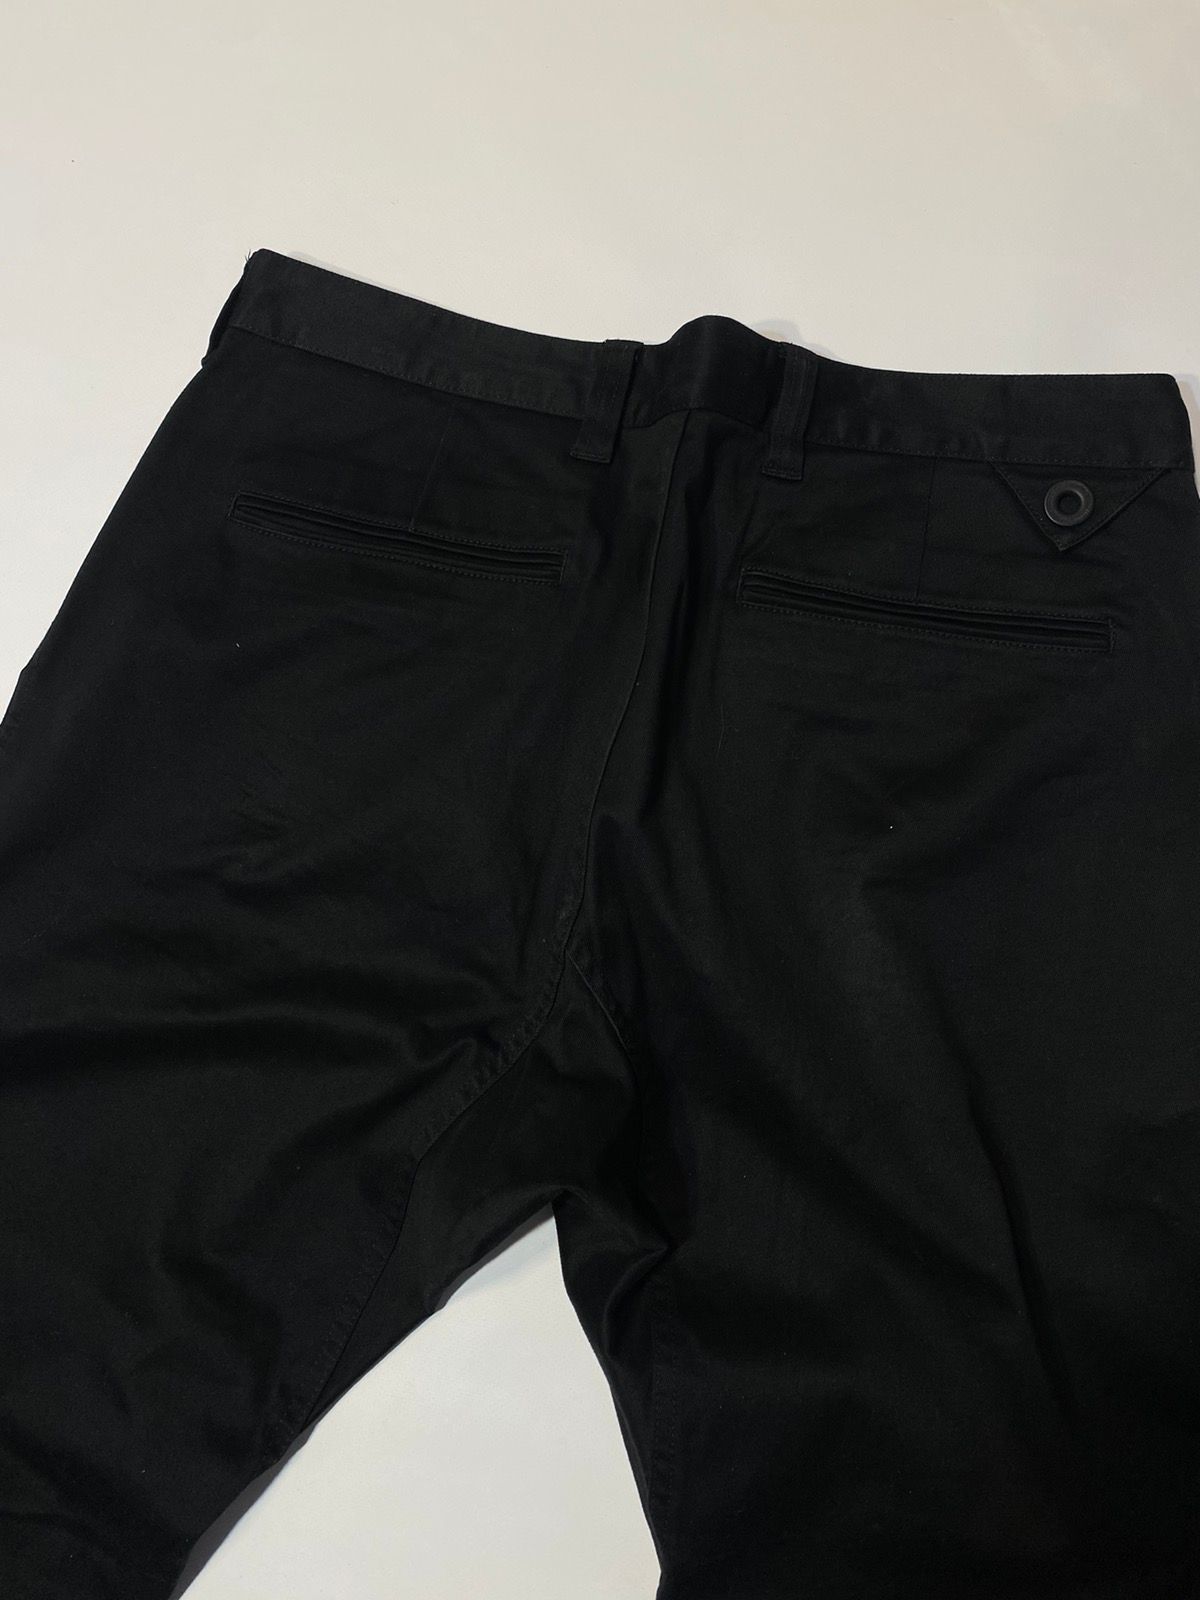 White Mountaineering MADE IN JAPAN White Moutaineering Casual Black Pants Size US 34 / EU 50 - 12 Thumbnail